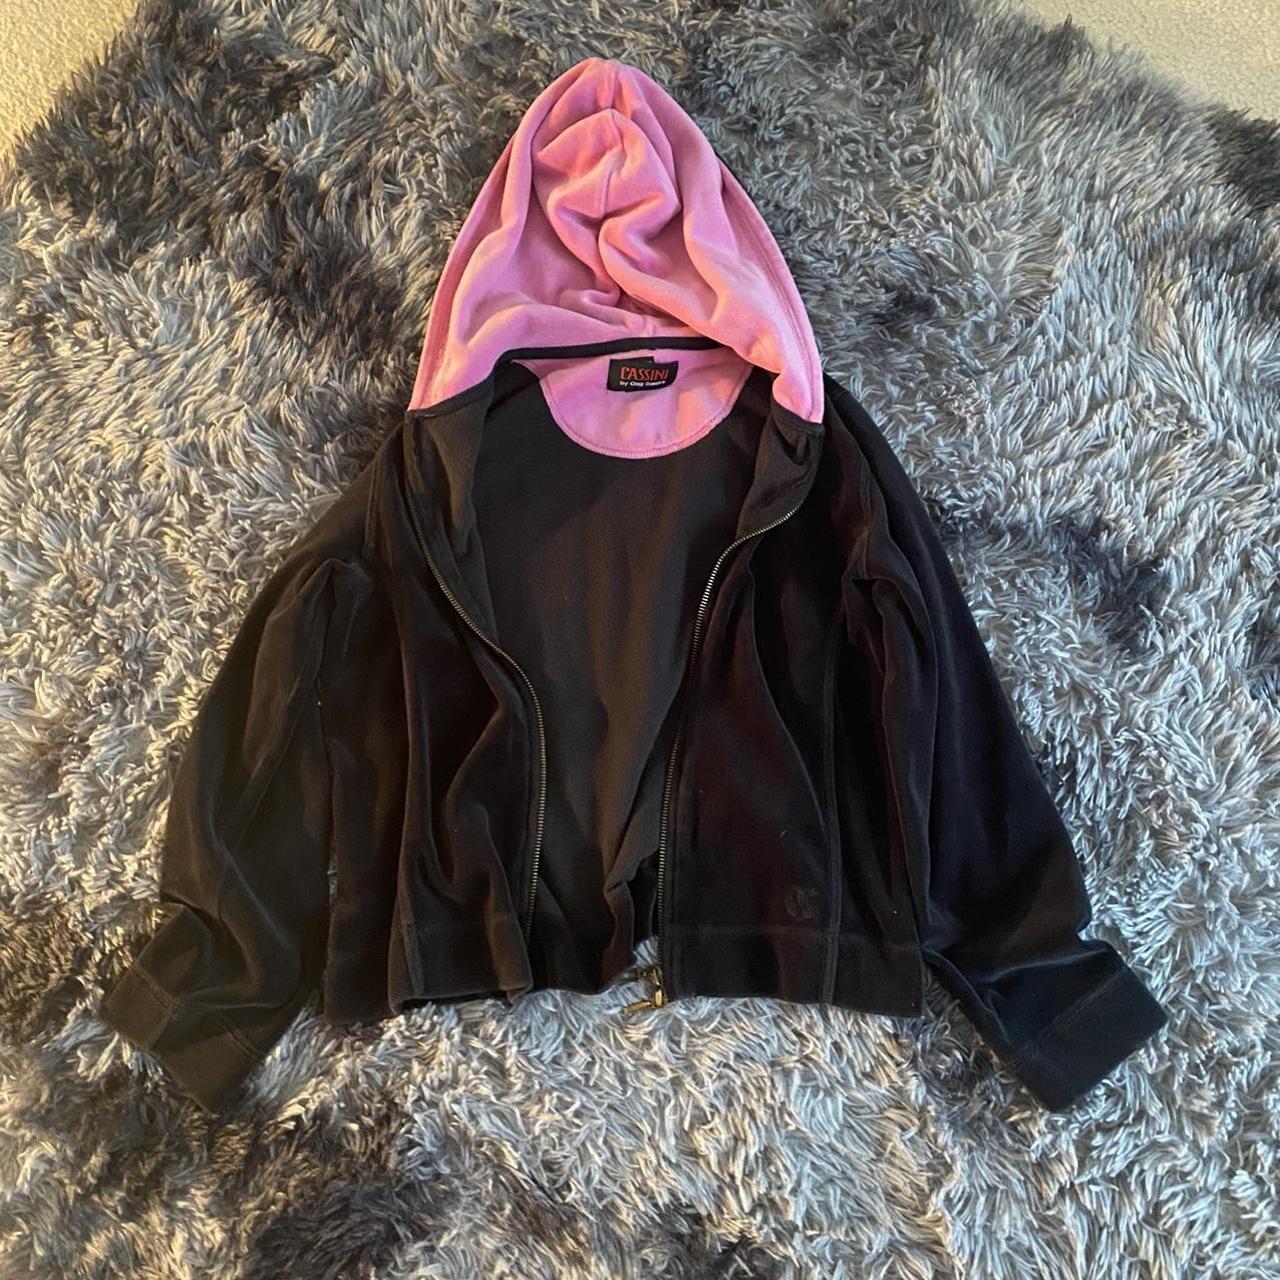 Cassina Women's Black and Pink Jacket